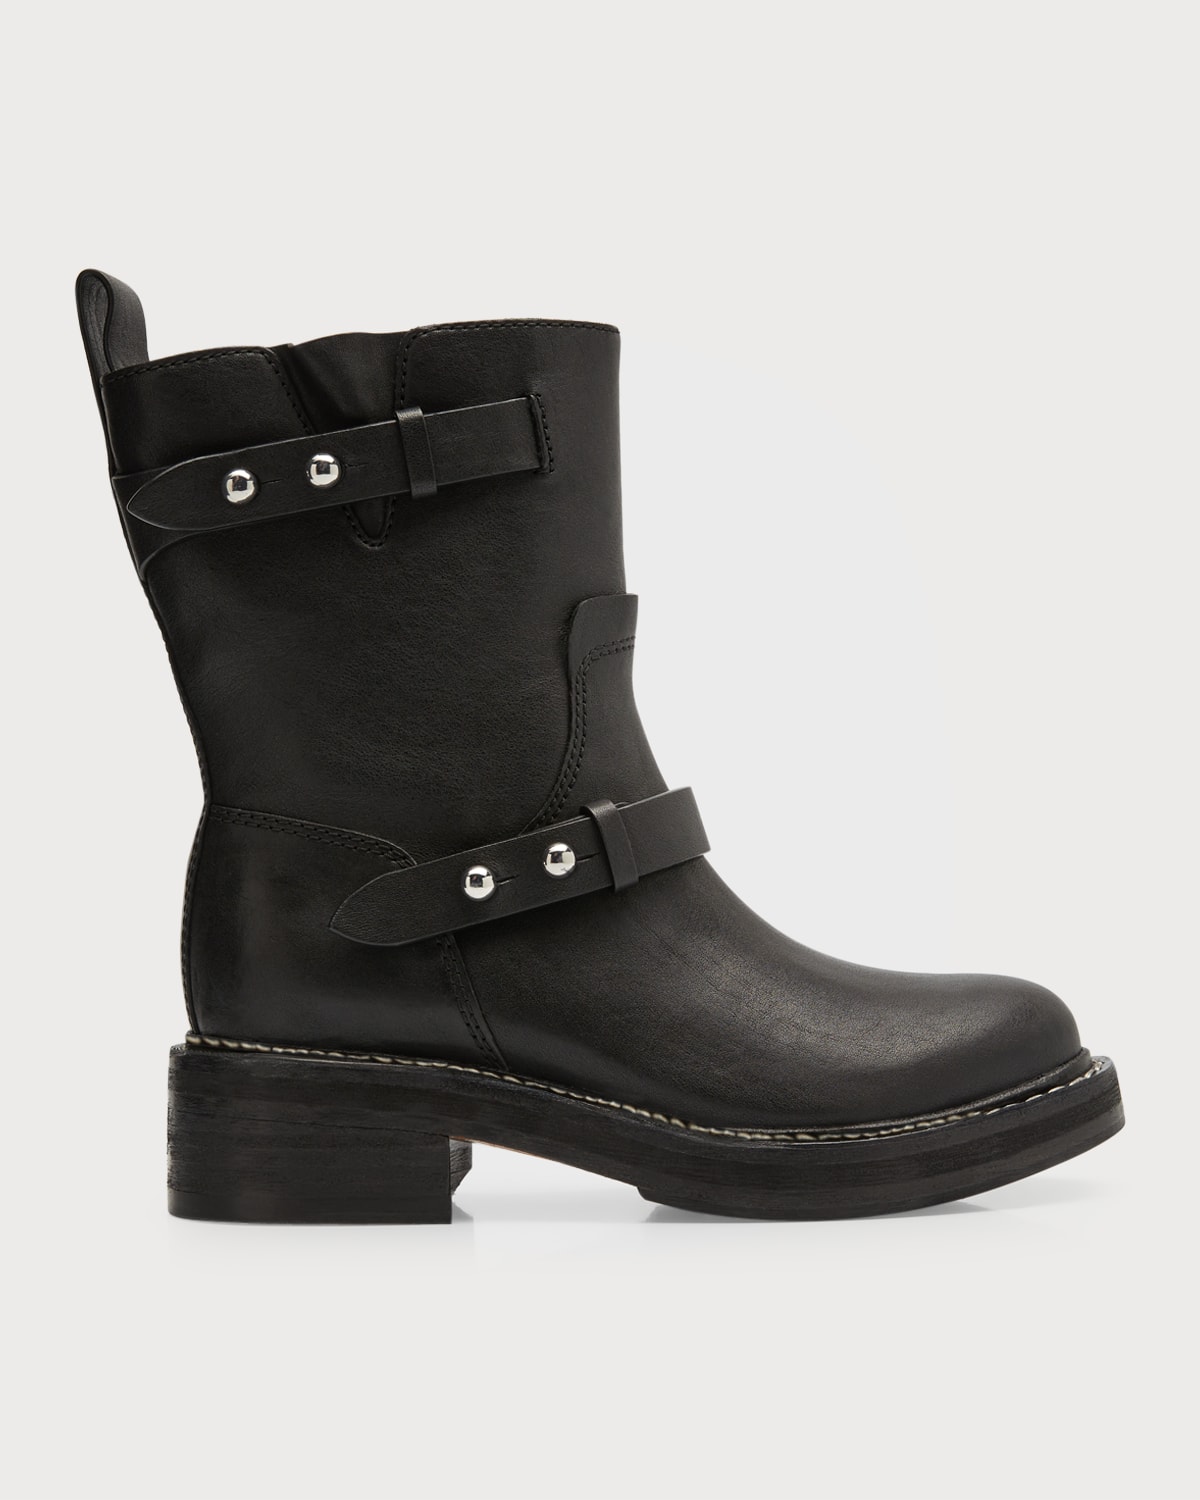 Leather Buckle Short Moto Boots